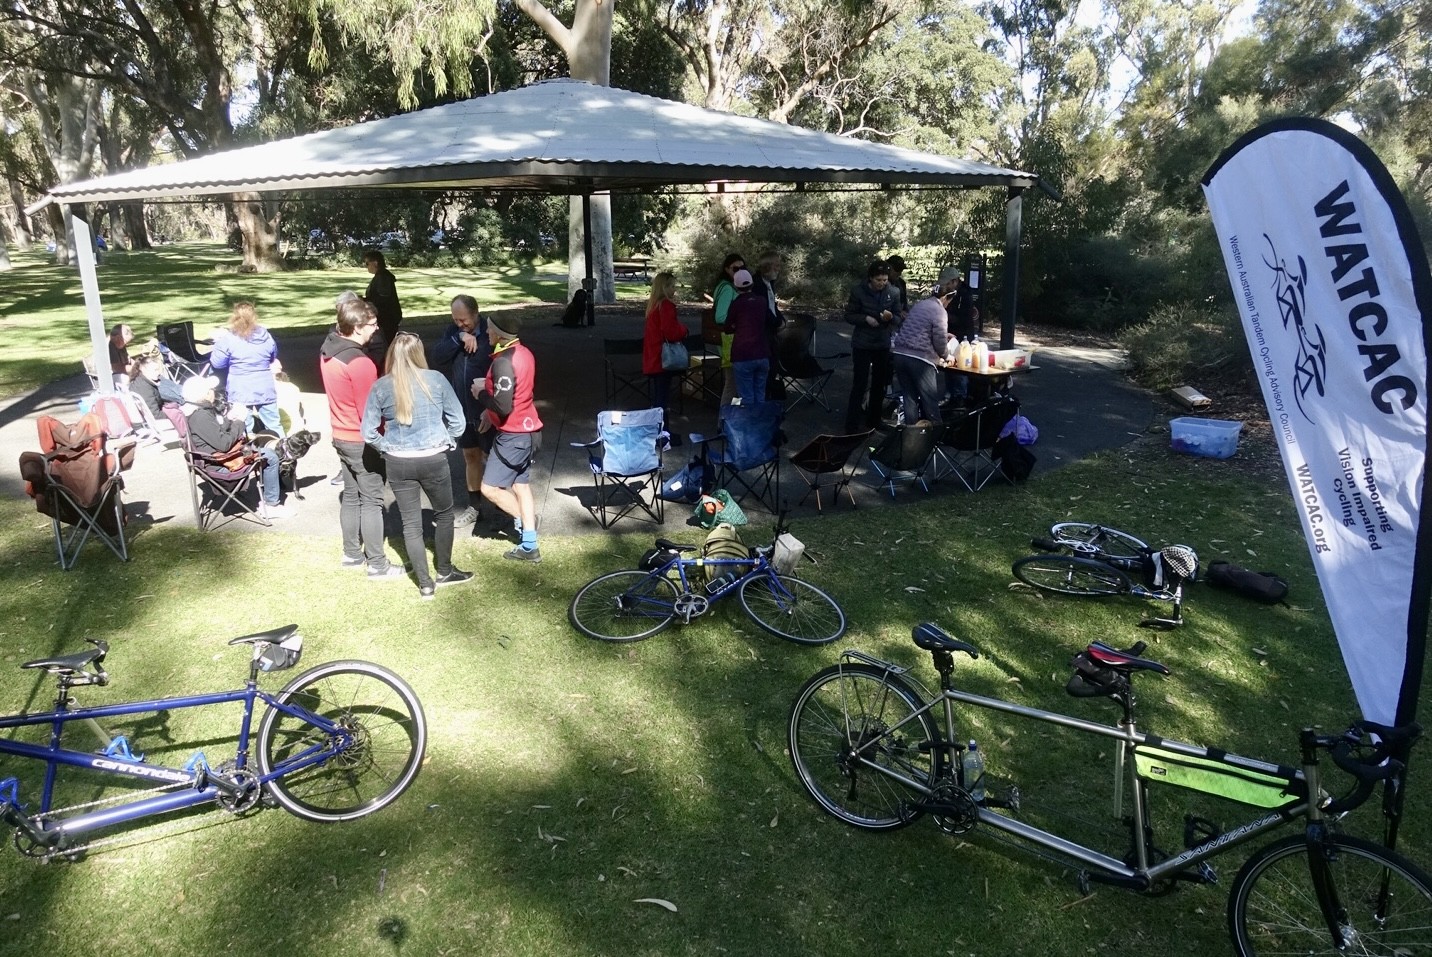 There was plenty to talk among those gathering at the picnic with groups gravitating to sunny spots near the picnic shelter.